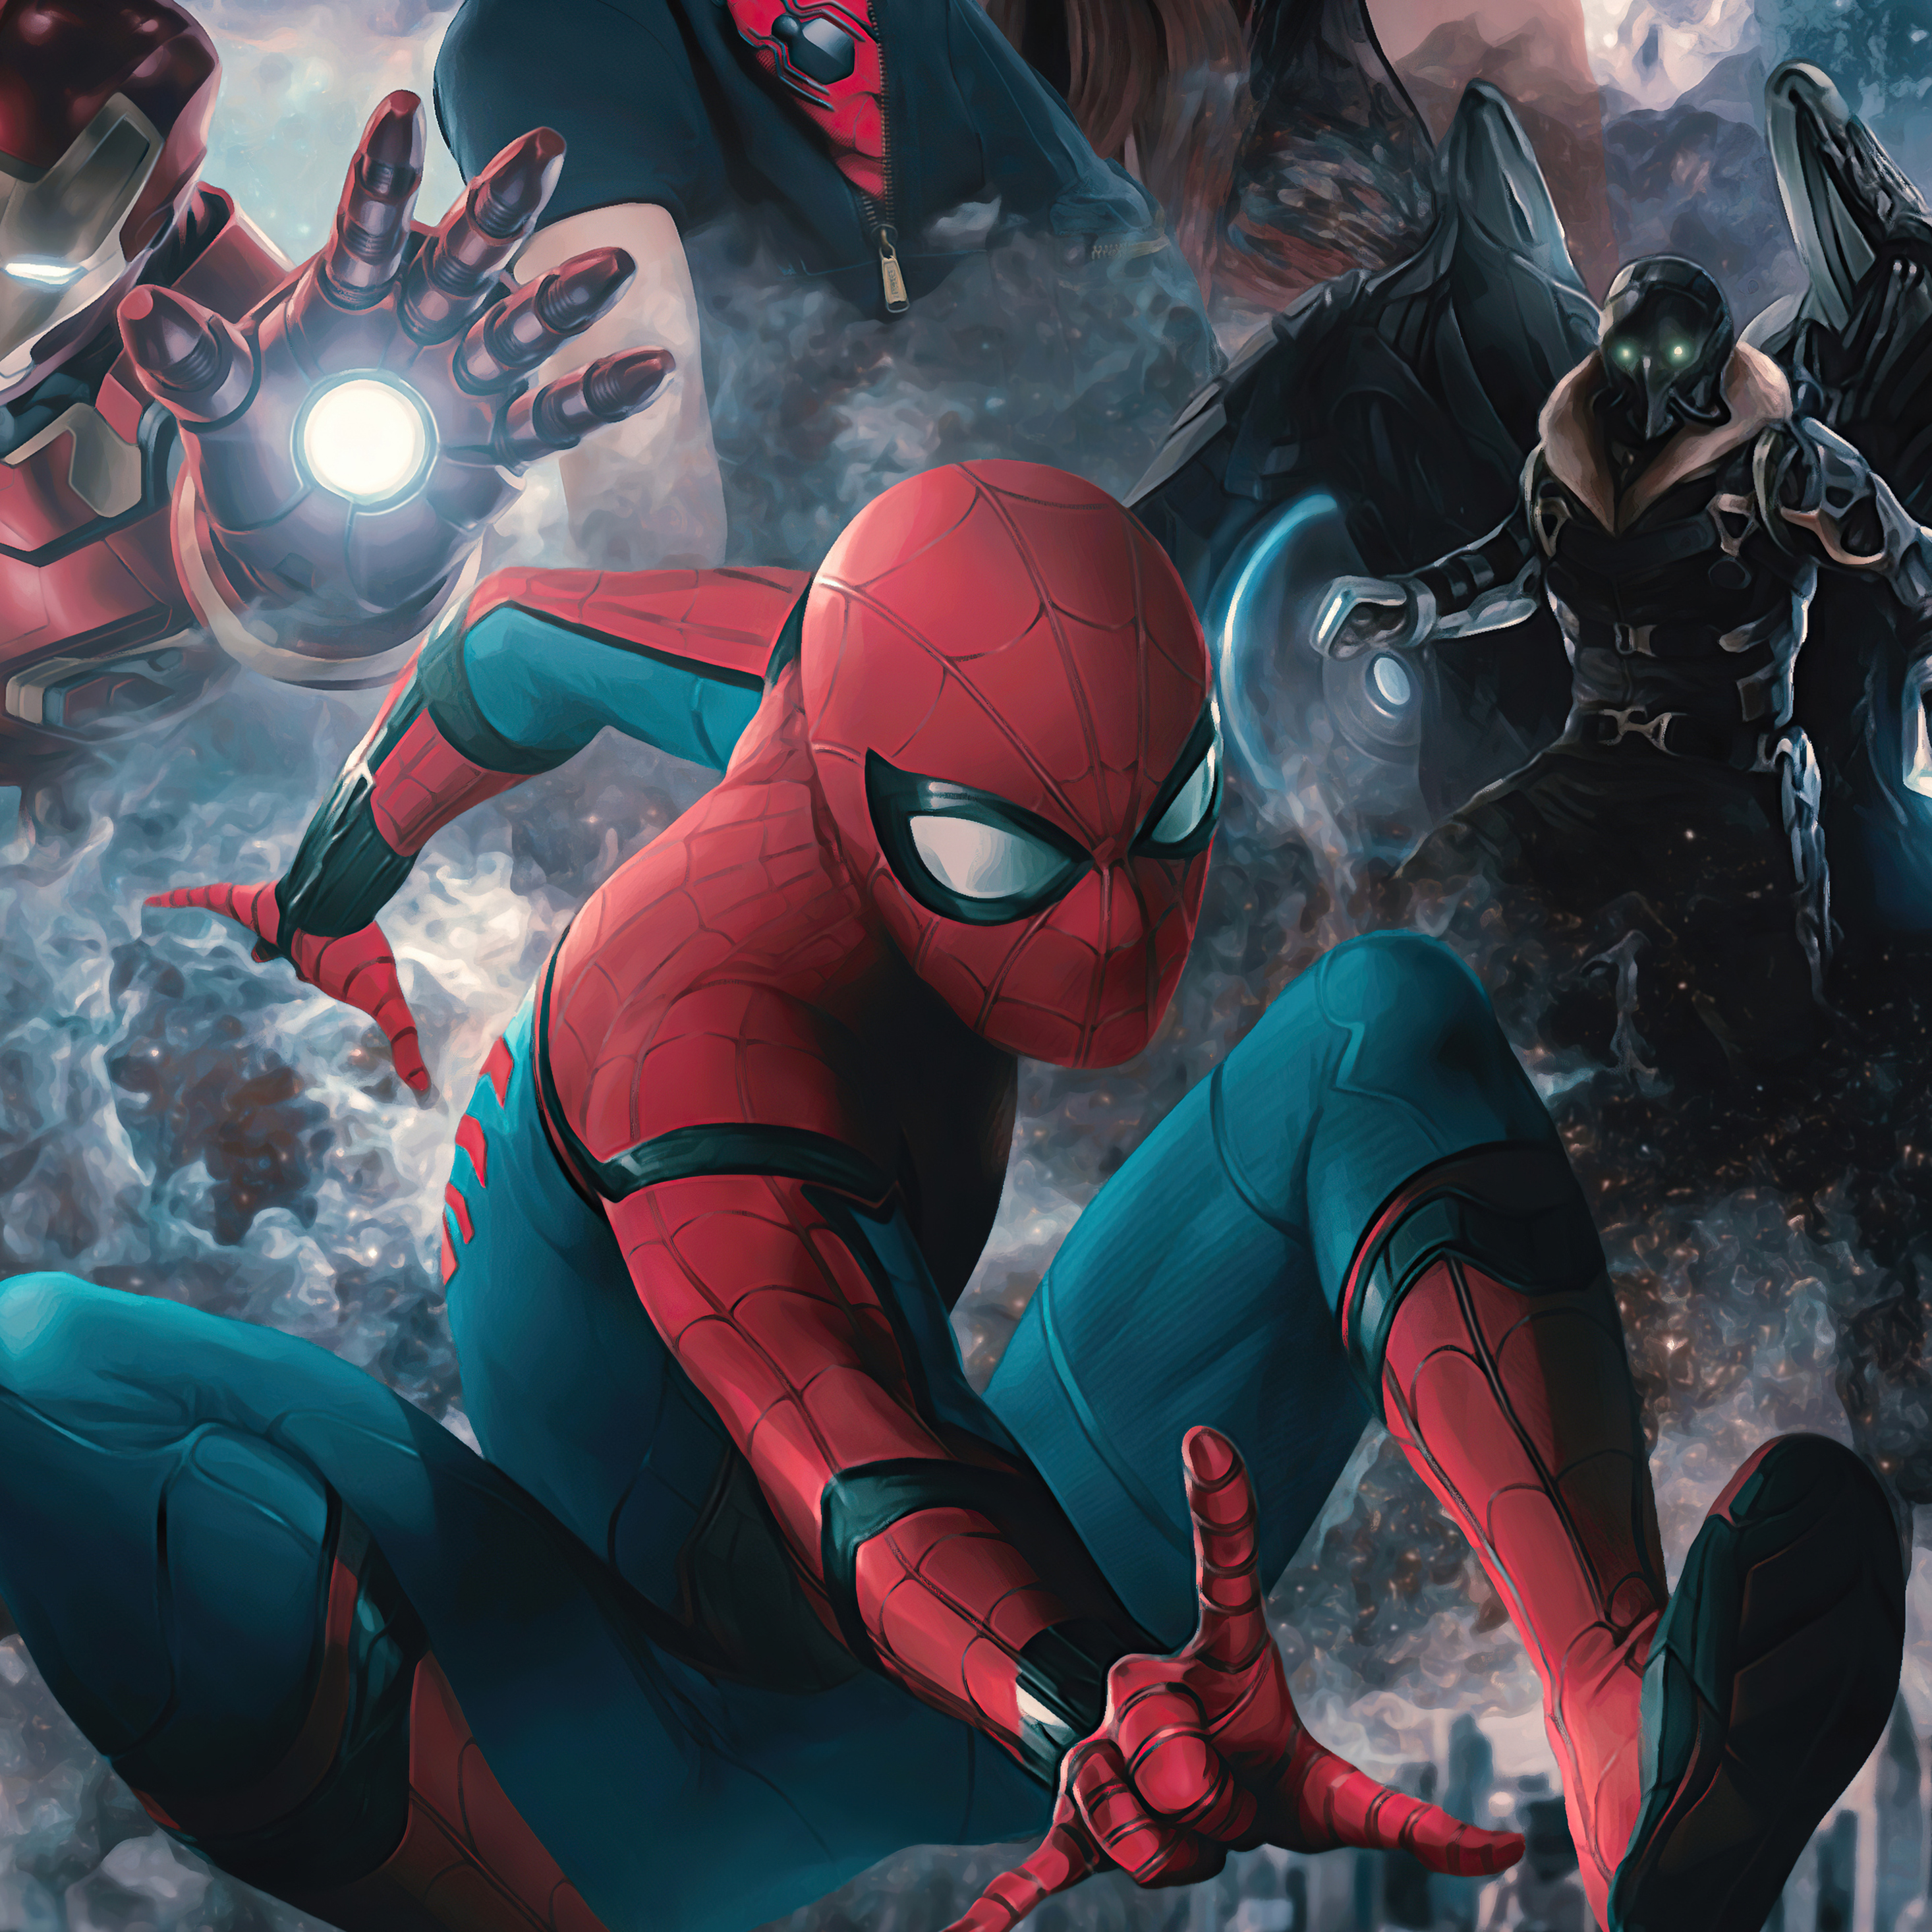 Spiderman Homecoming Poster Hd Wallpapers